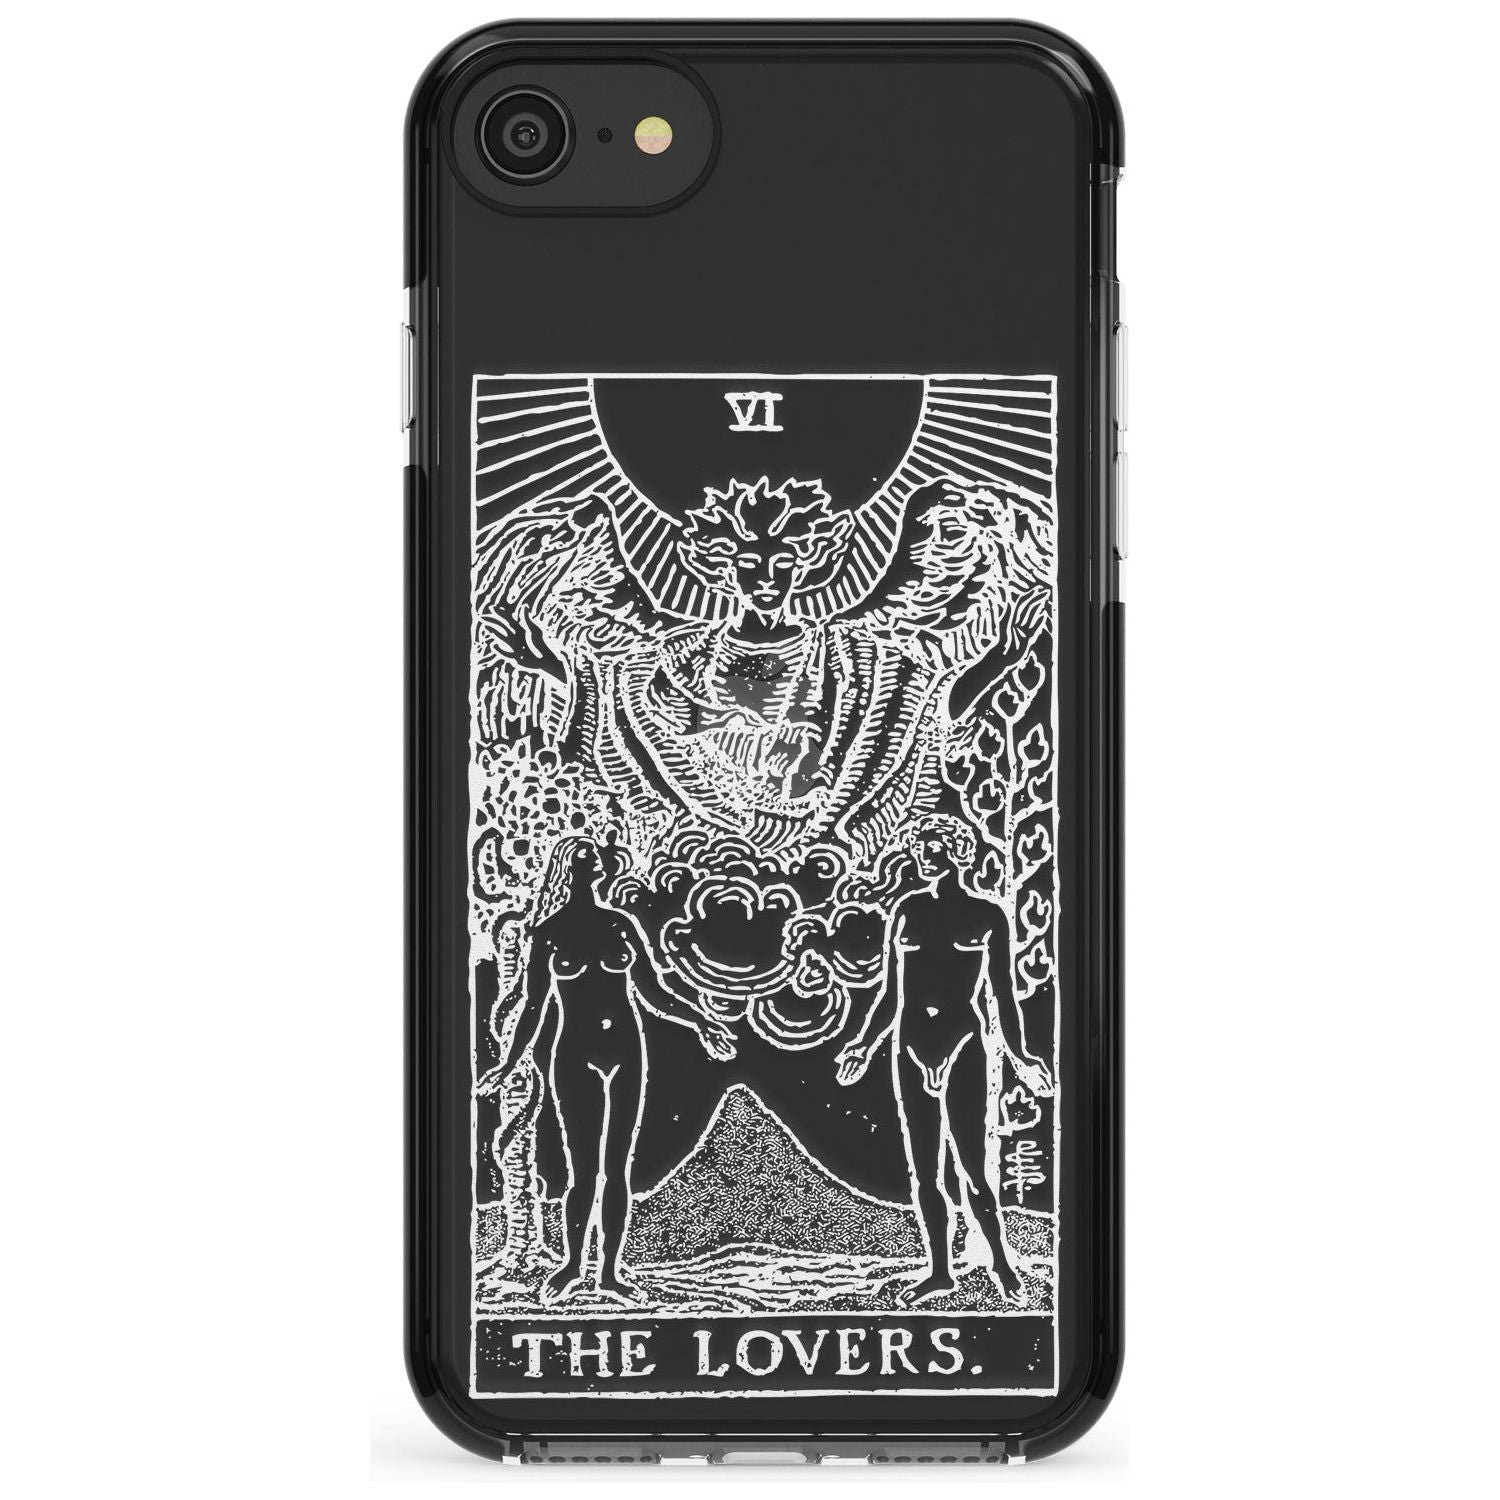 The Lovers Tarot Card - White Transparent Pink Fade Impact Phone Case for iPhone SE 8 7 Plus